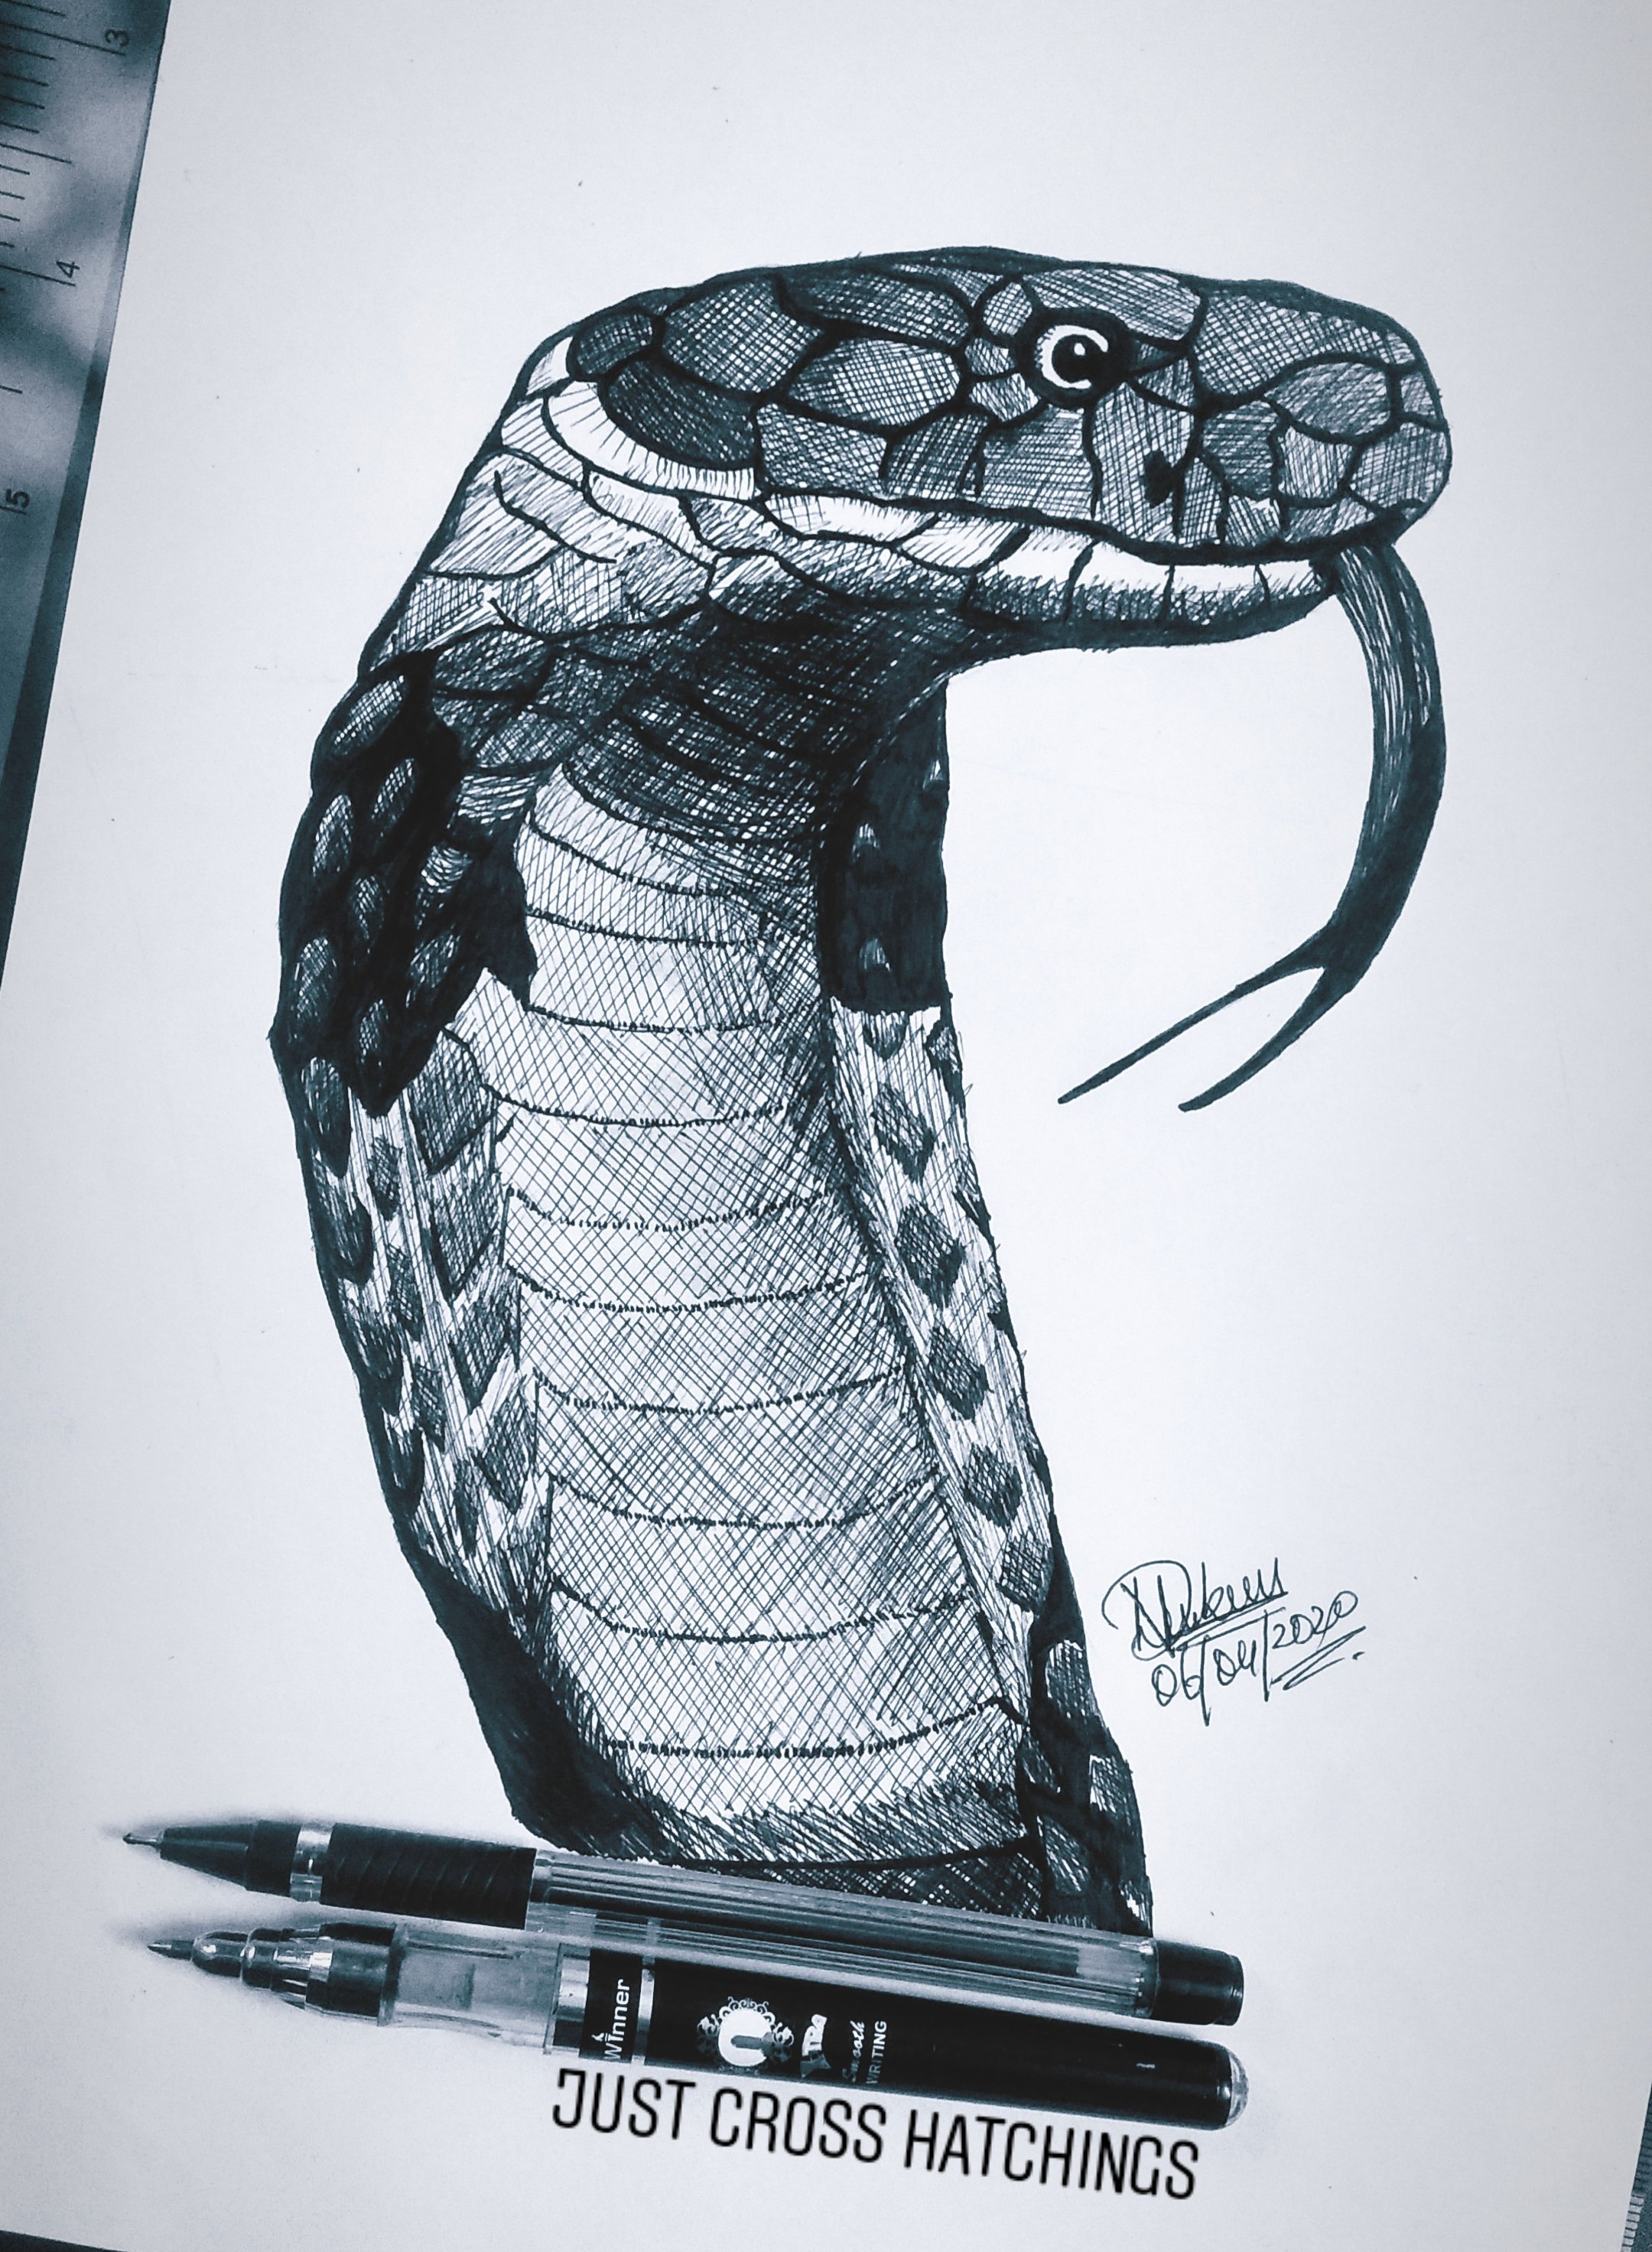 Cobra Drawing - How To Draw A Cobra Step By Step